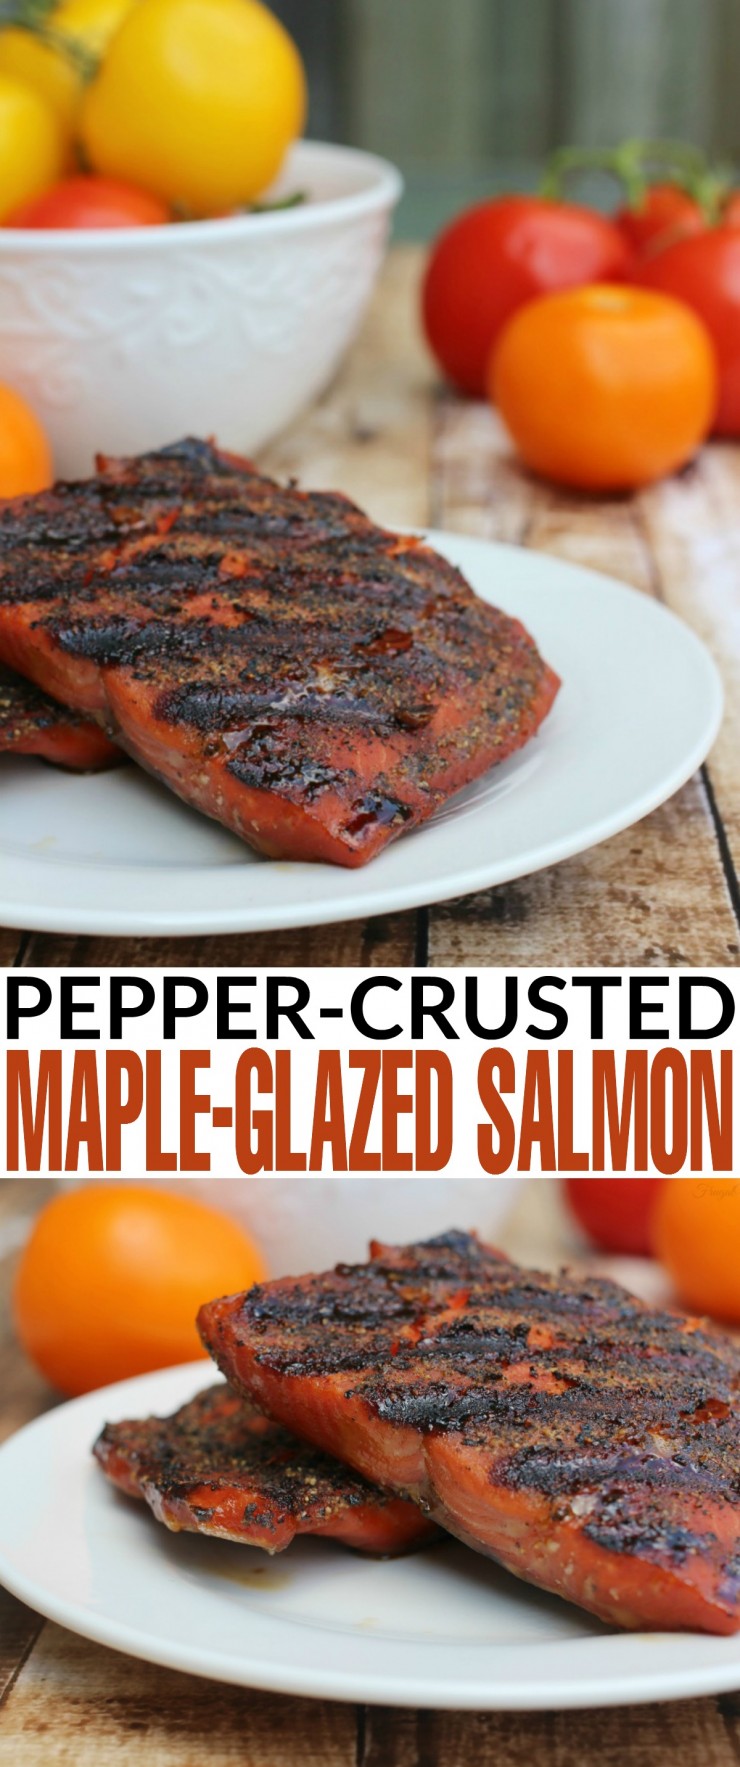 This Pepper-Crusted Maple-Glazed Salmon is so full of complex flavour its the perfect recipe for family dinner or to serve guests.